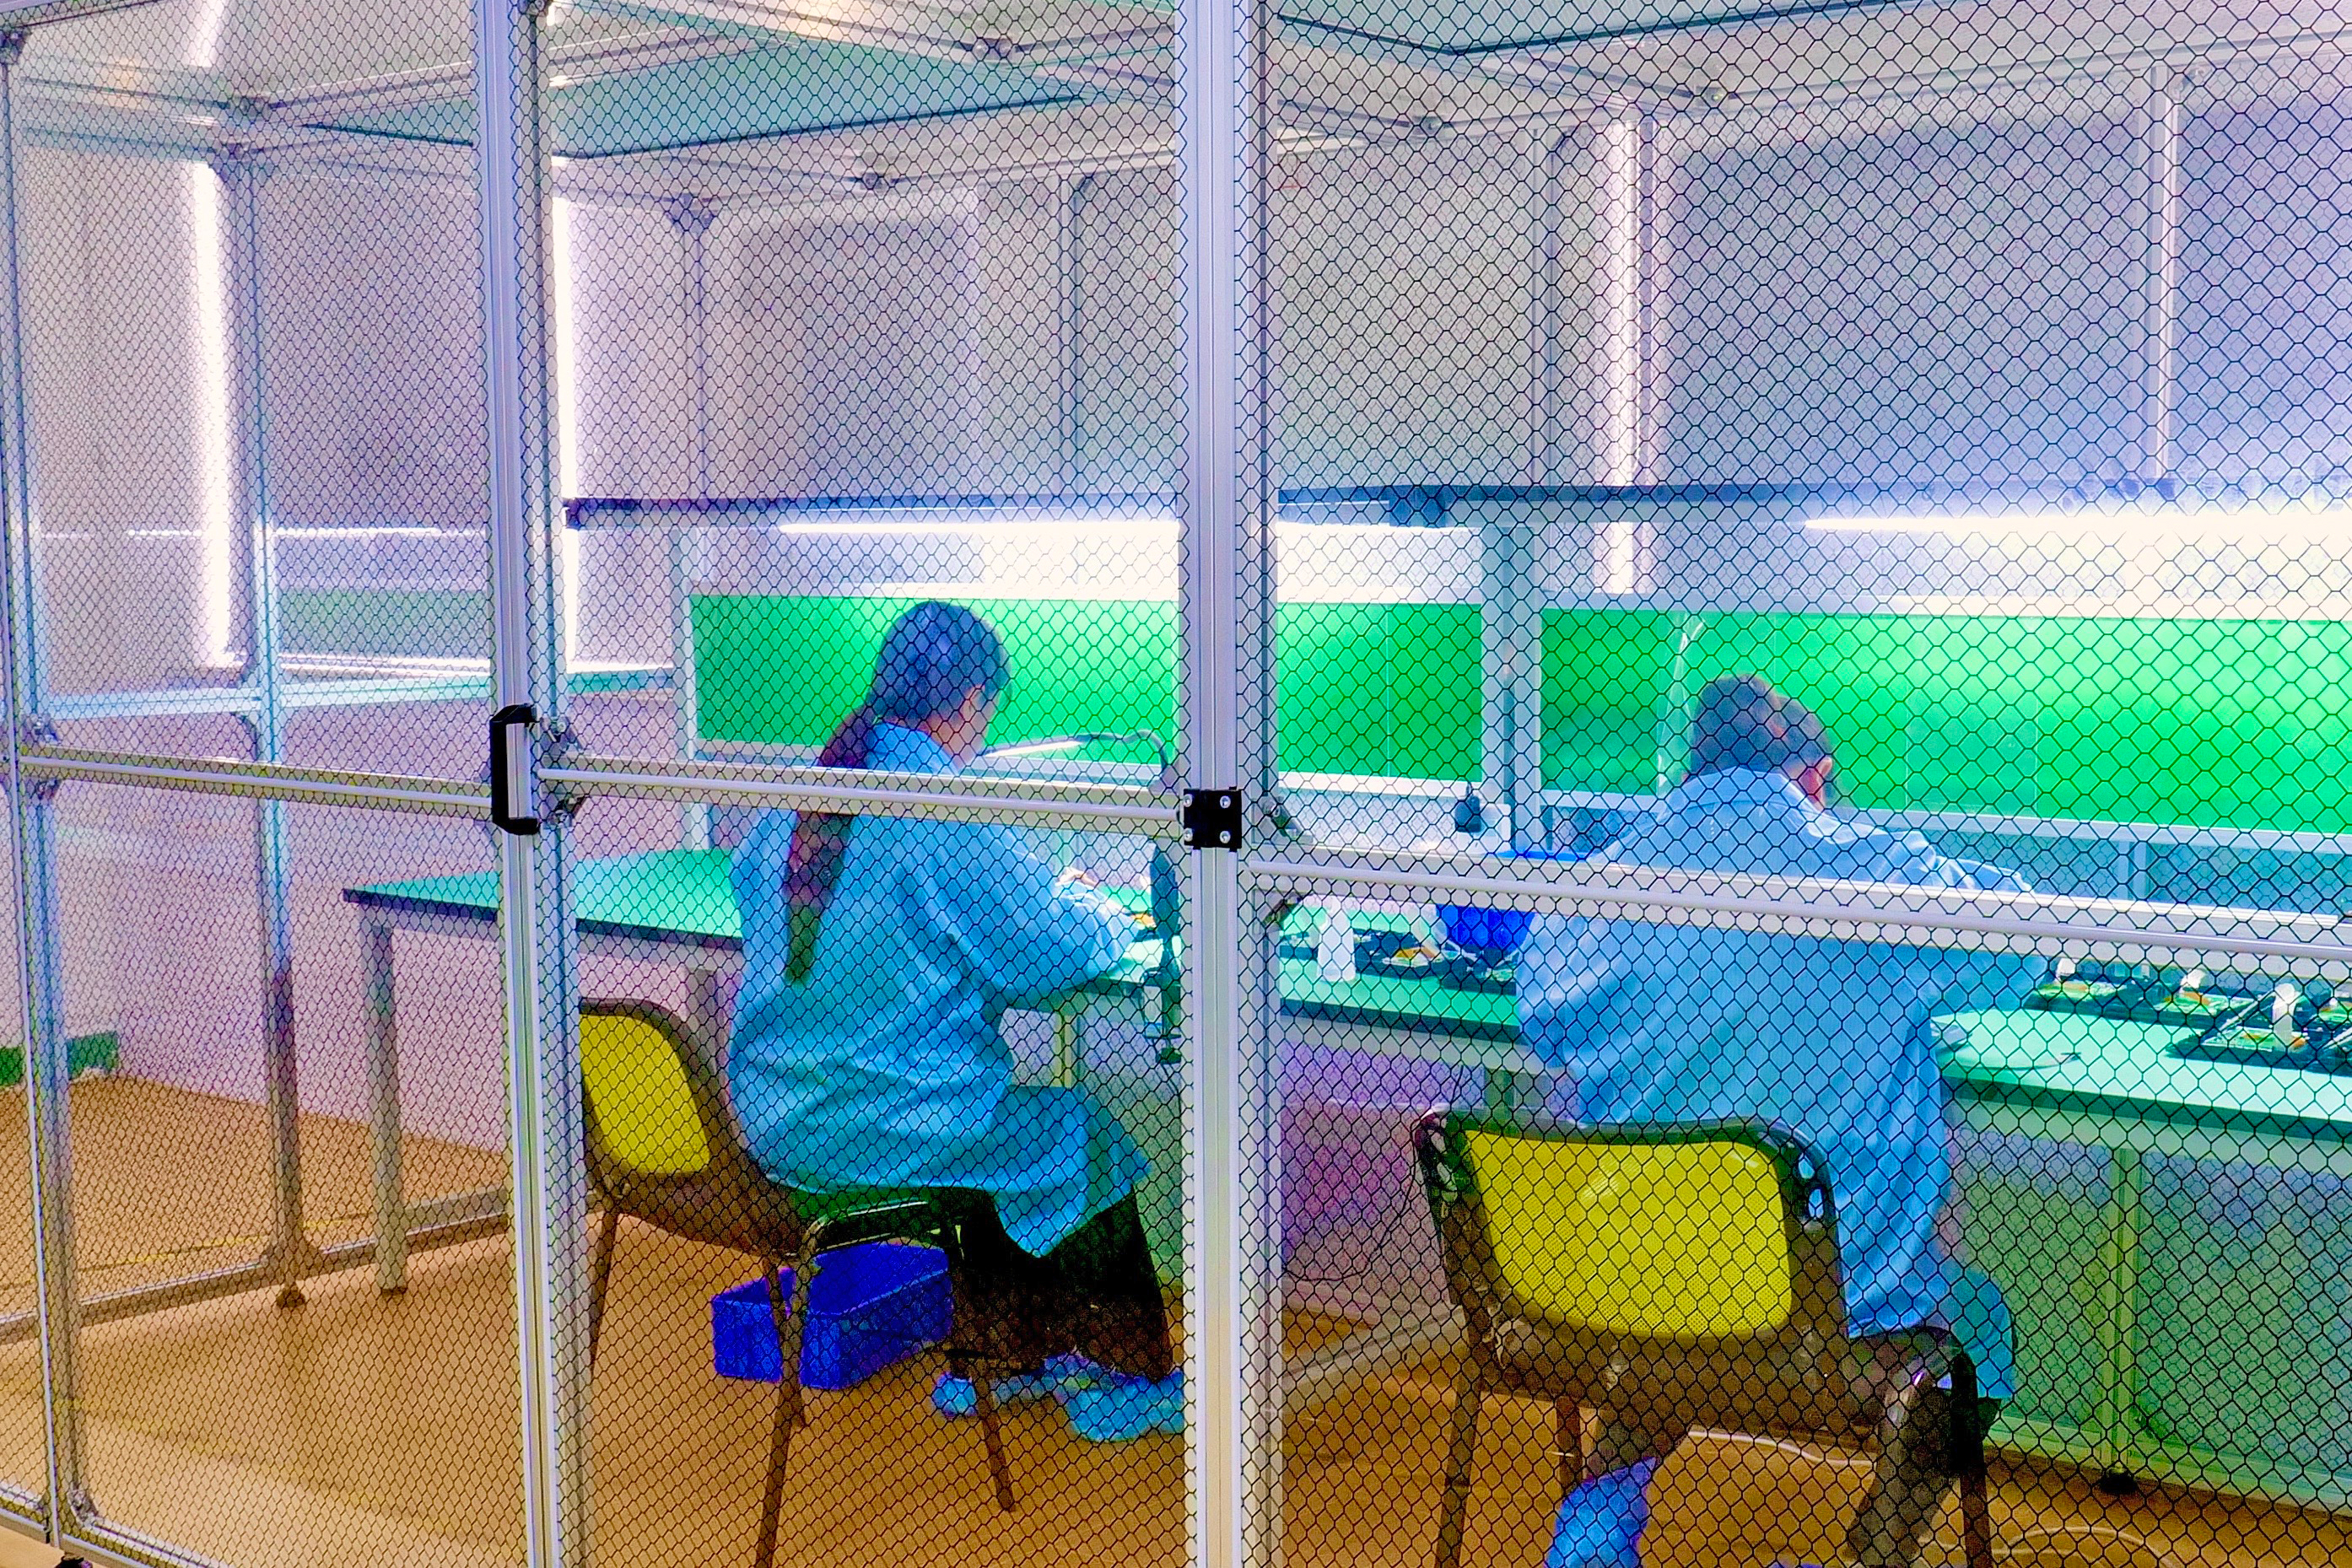 The image shows two working people at Noris-Sibo production facility. They are sitting in closed ESD sterile room